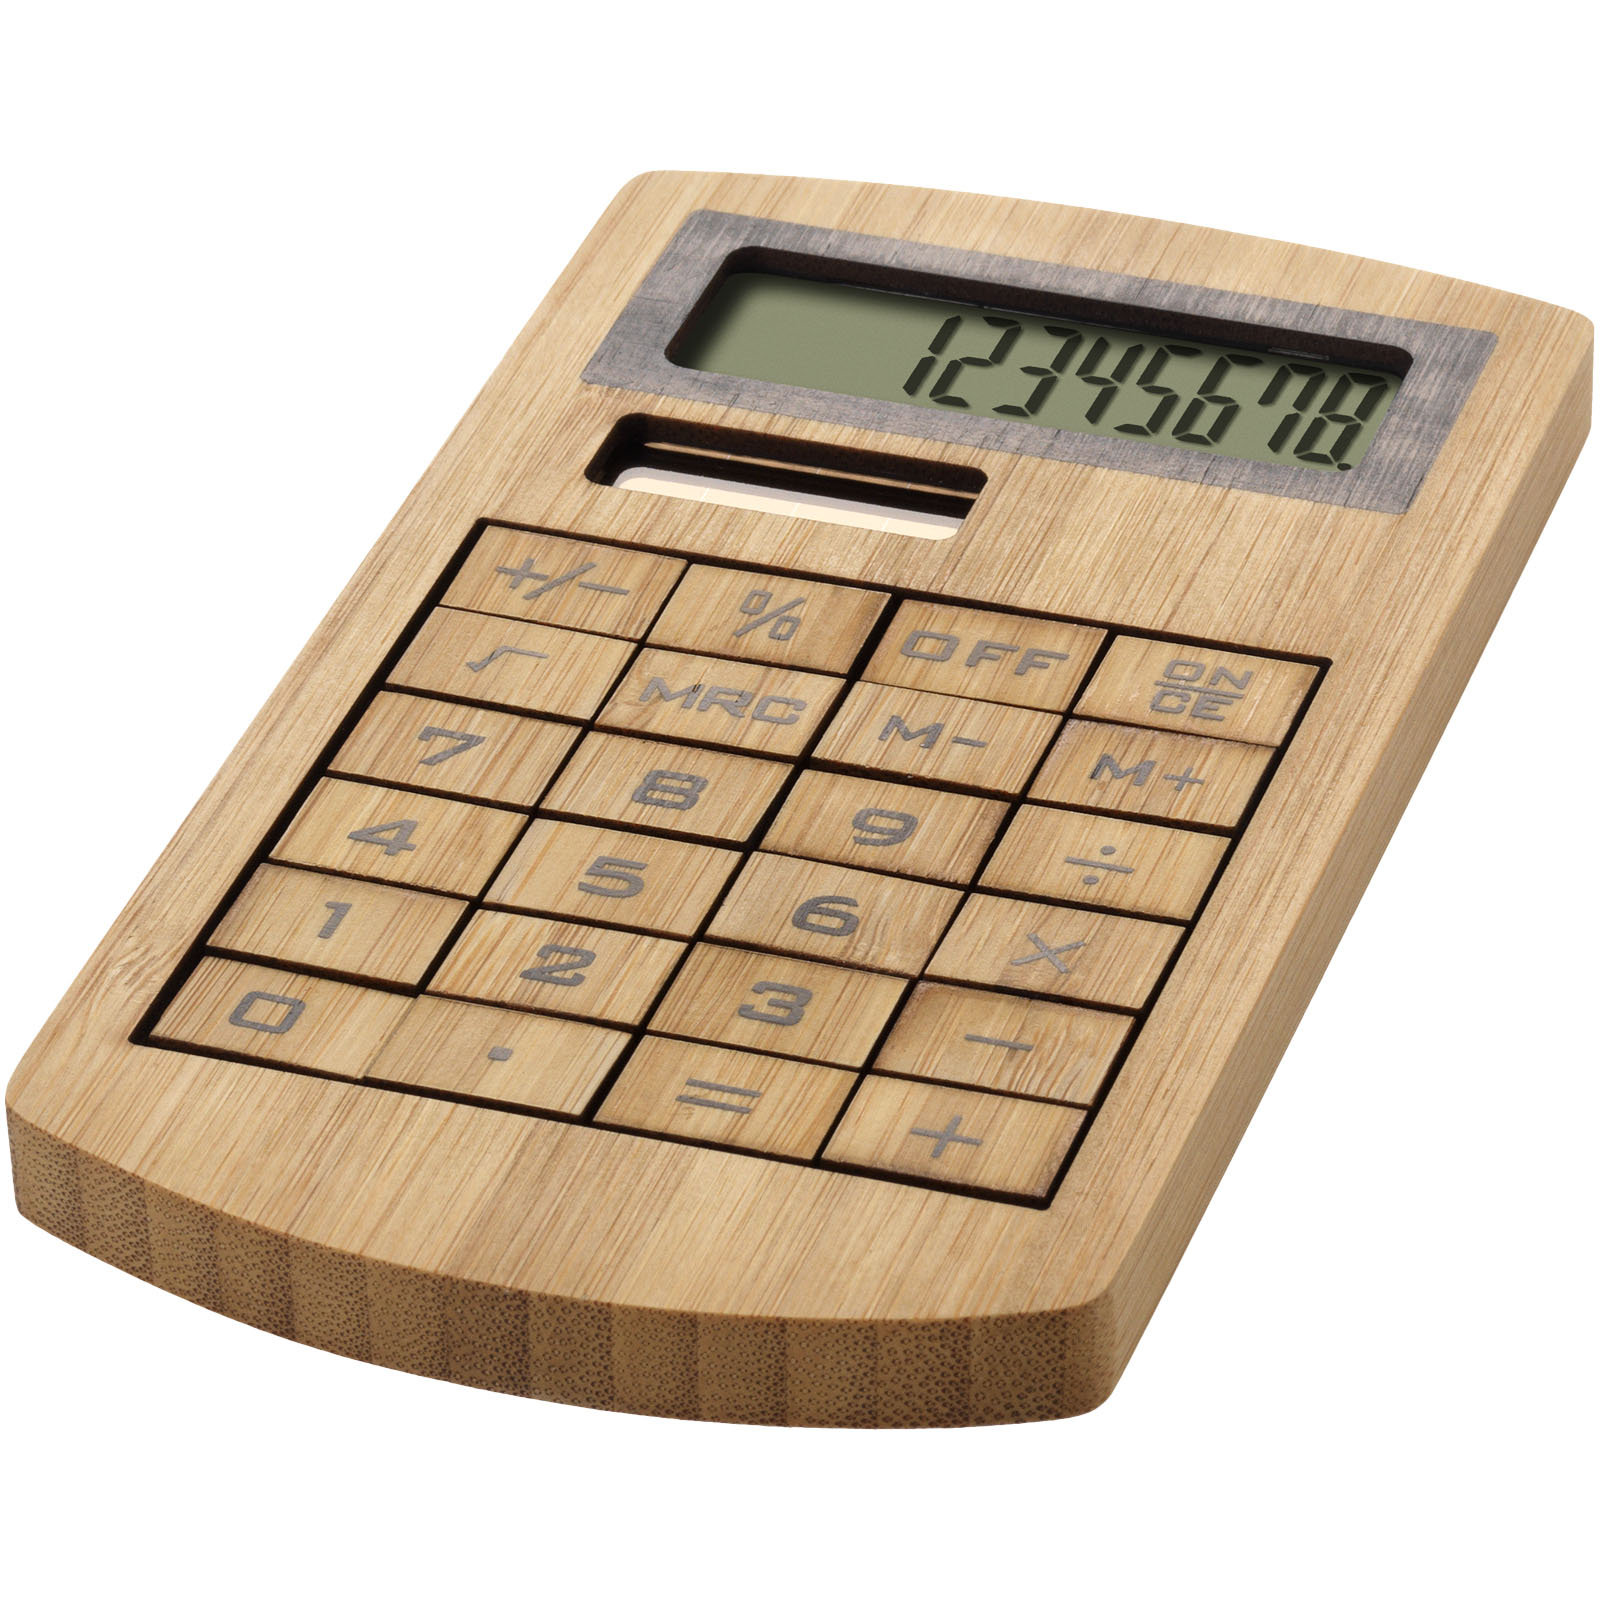 Advertising Desk Accessories - Eugene calculator made of bamboo